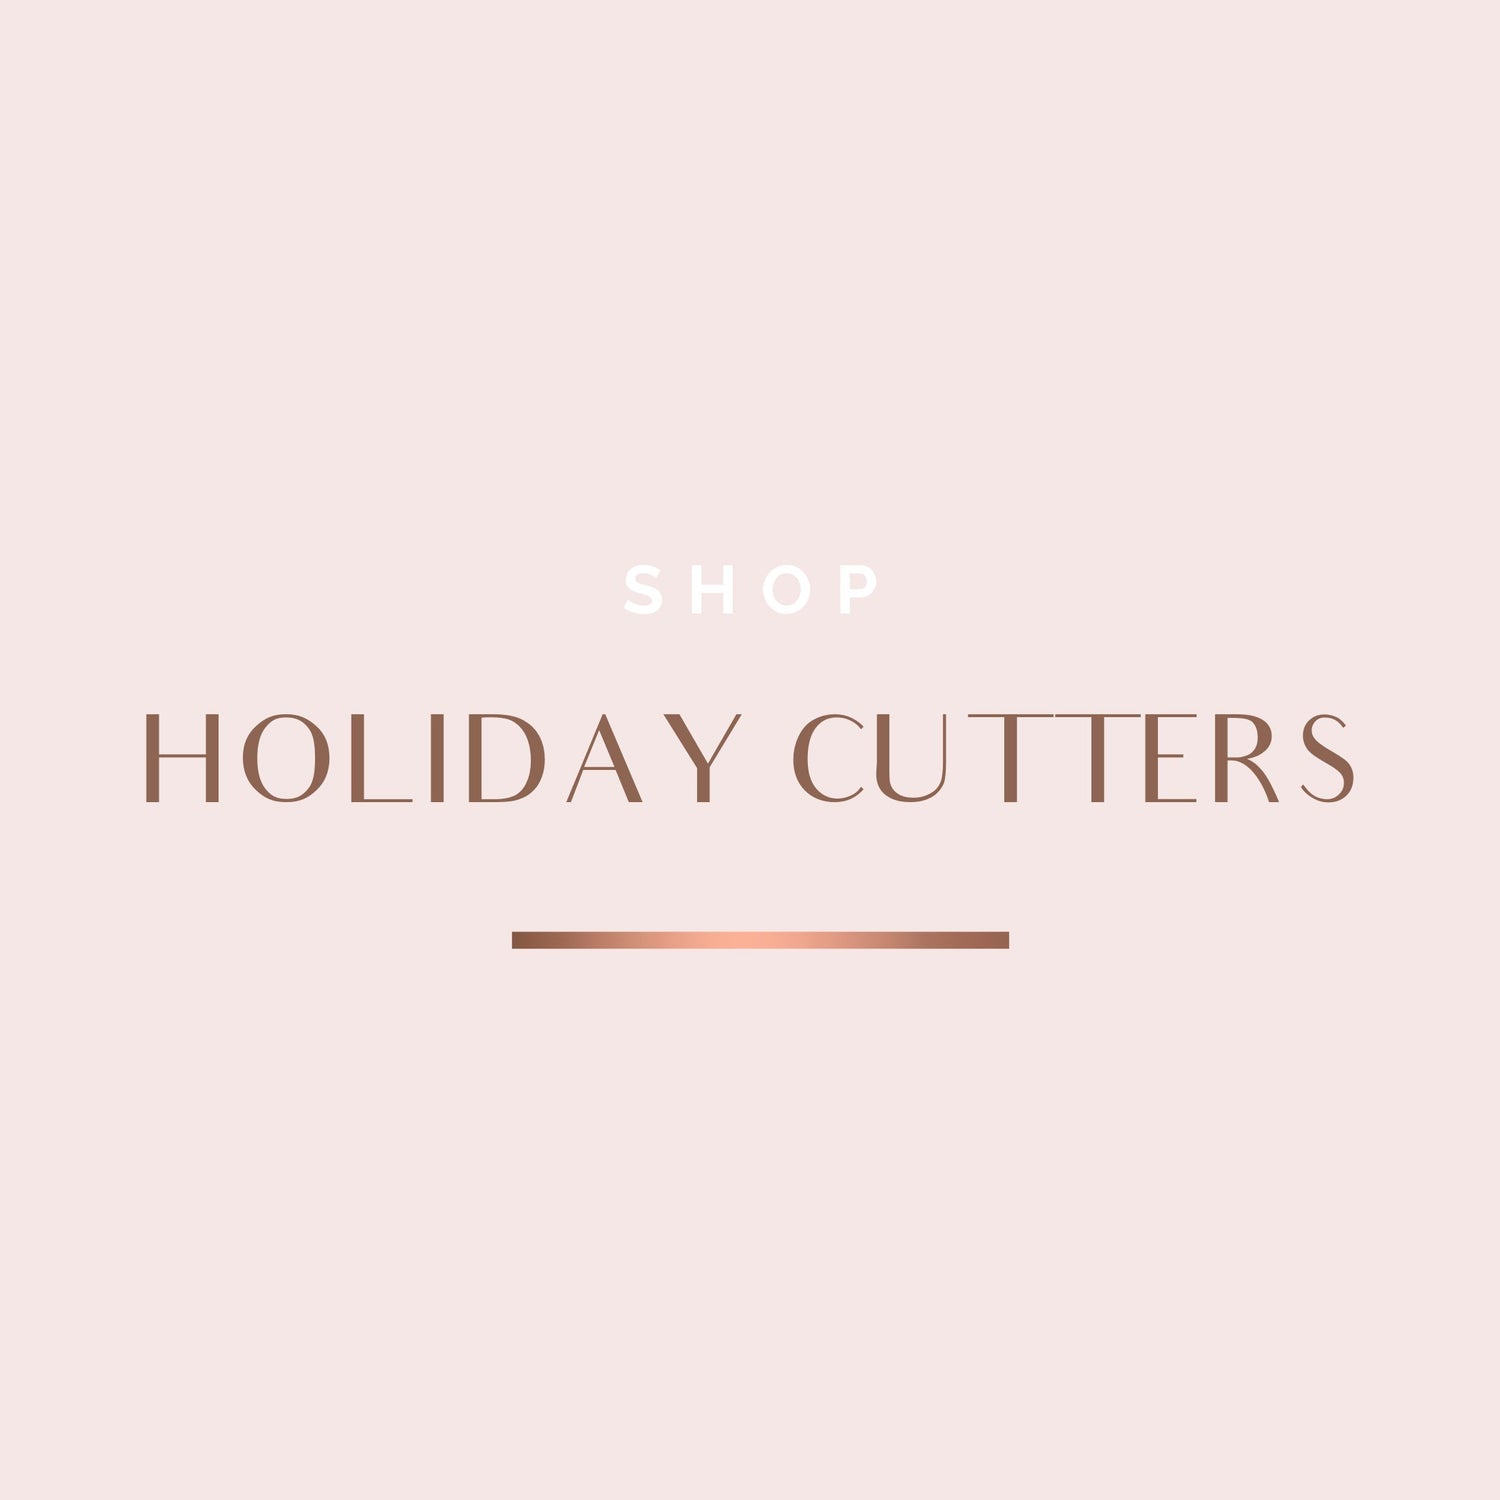 HOLIDAY CUTTERS